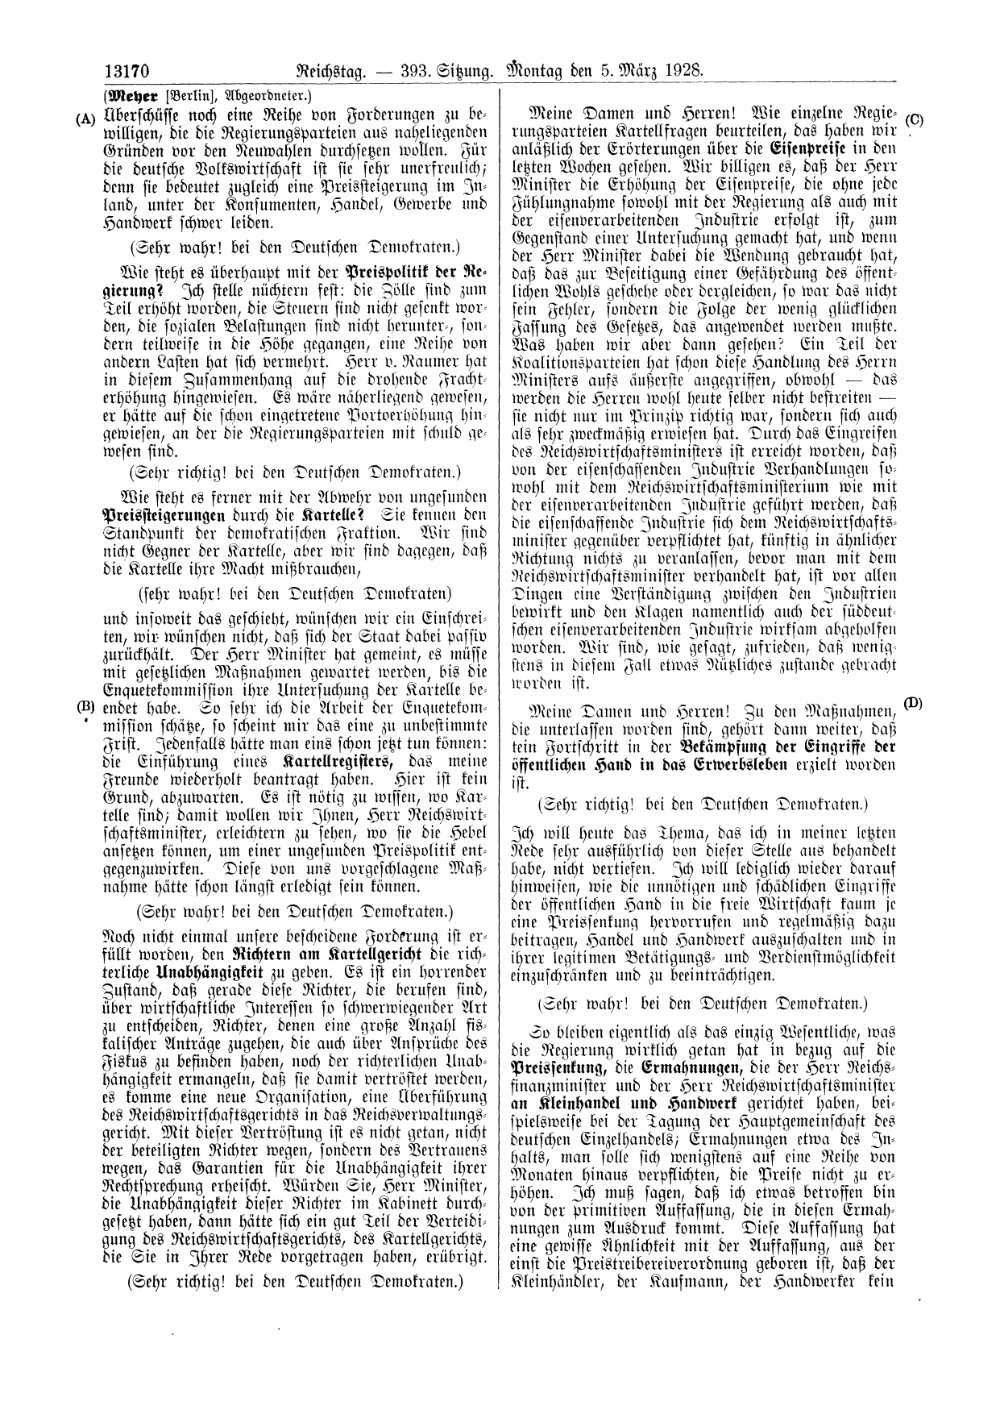 Scan of page 13170